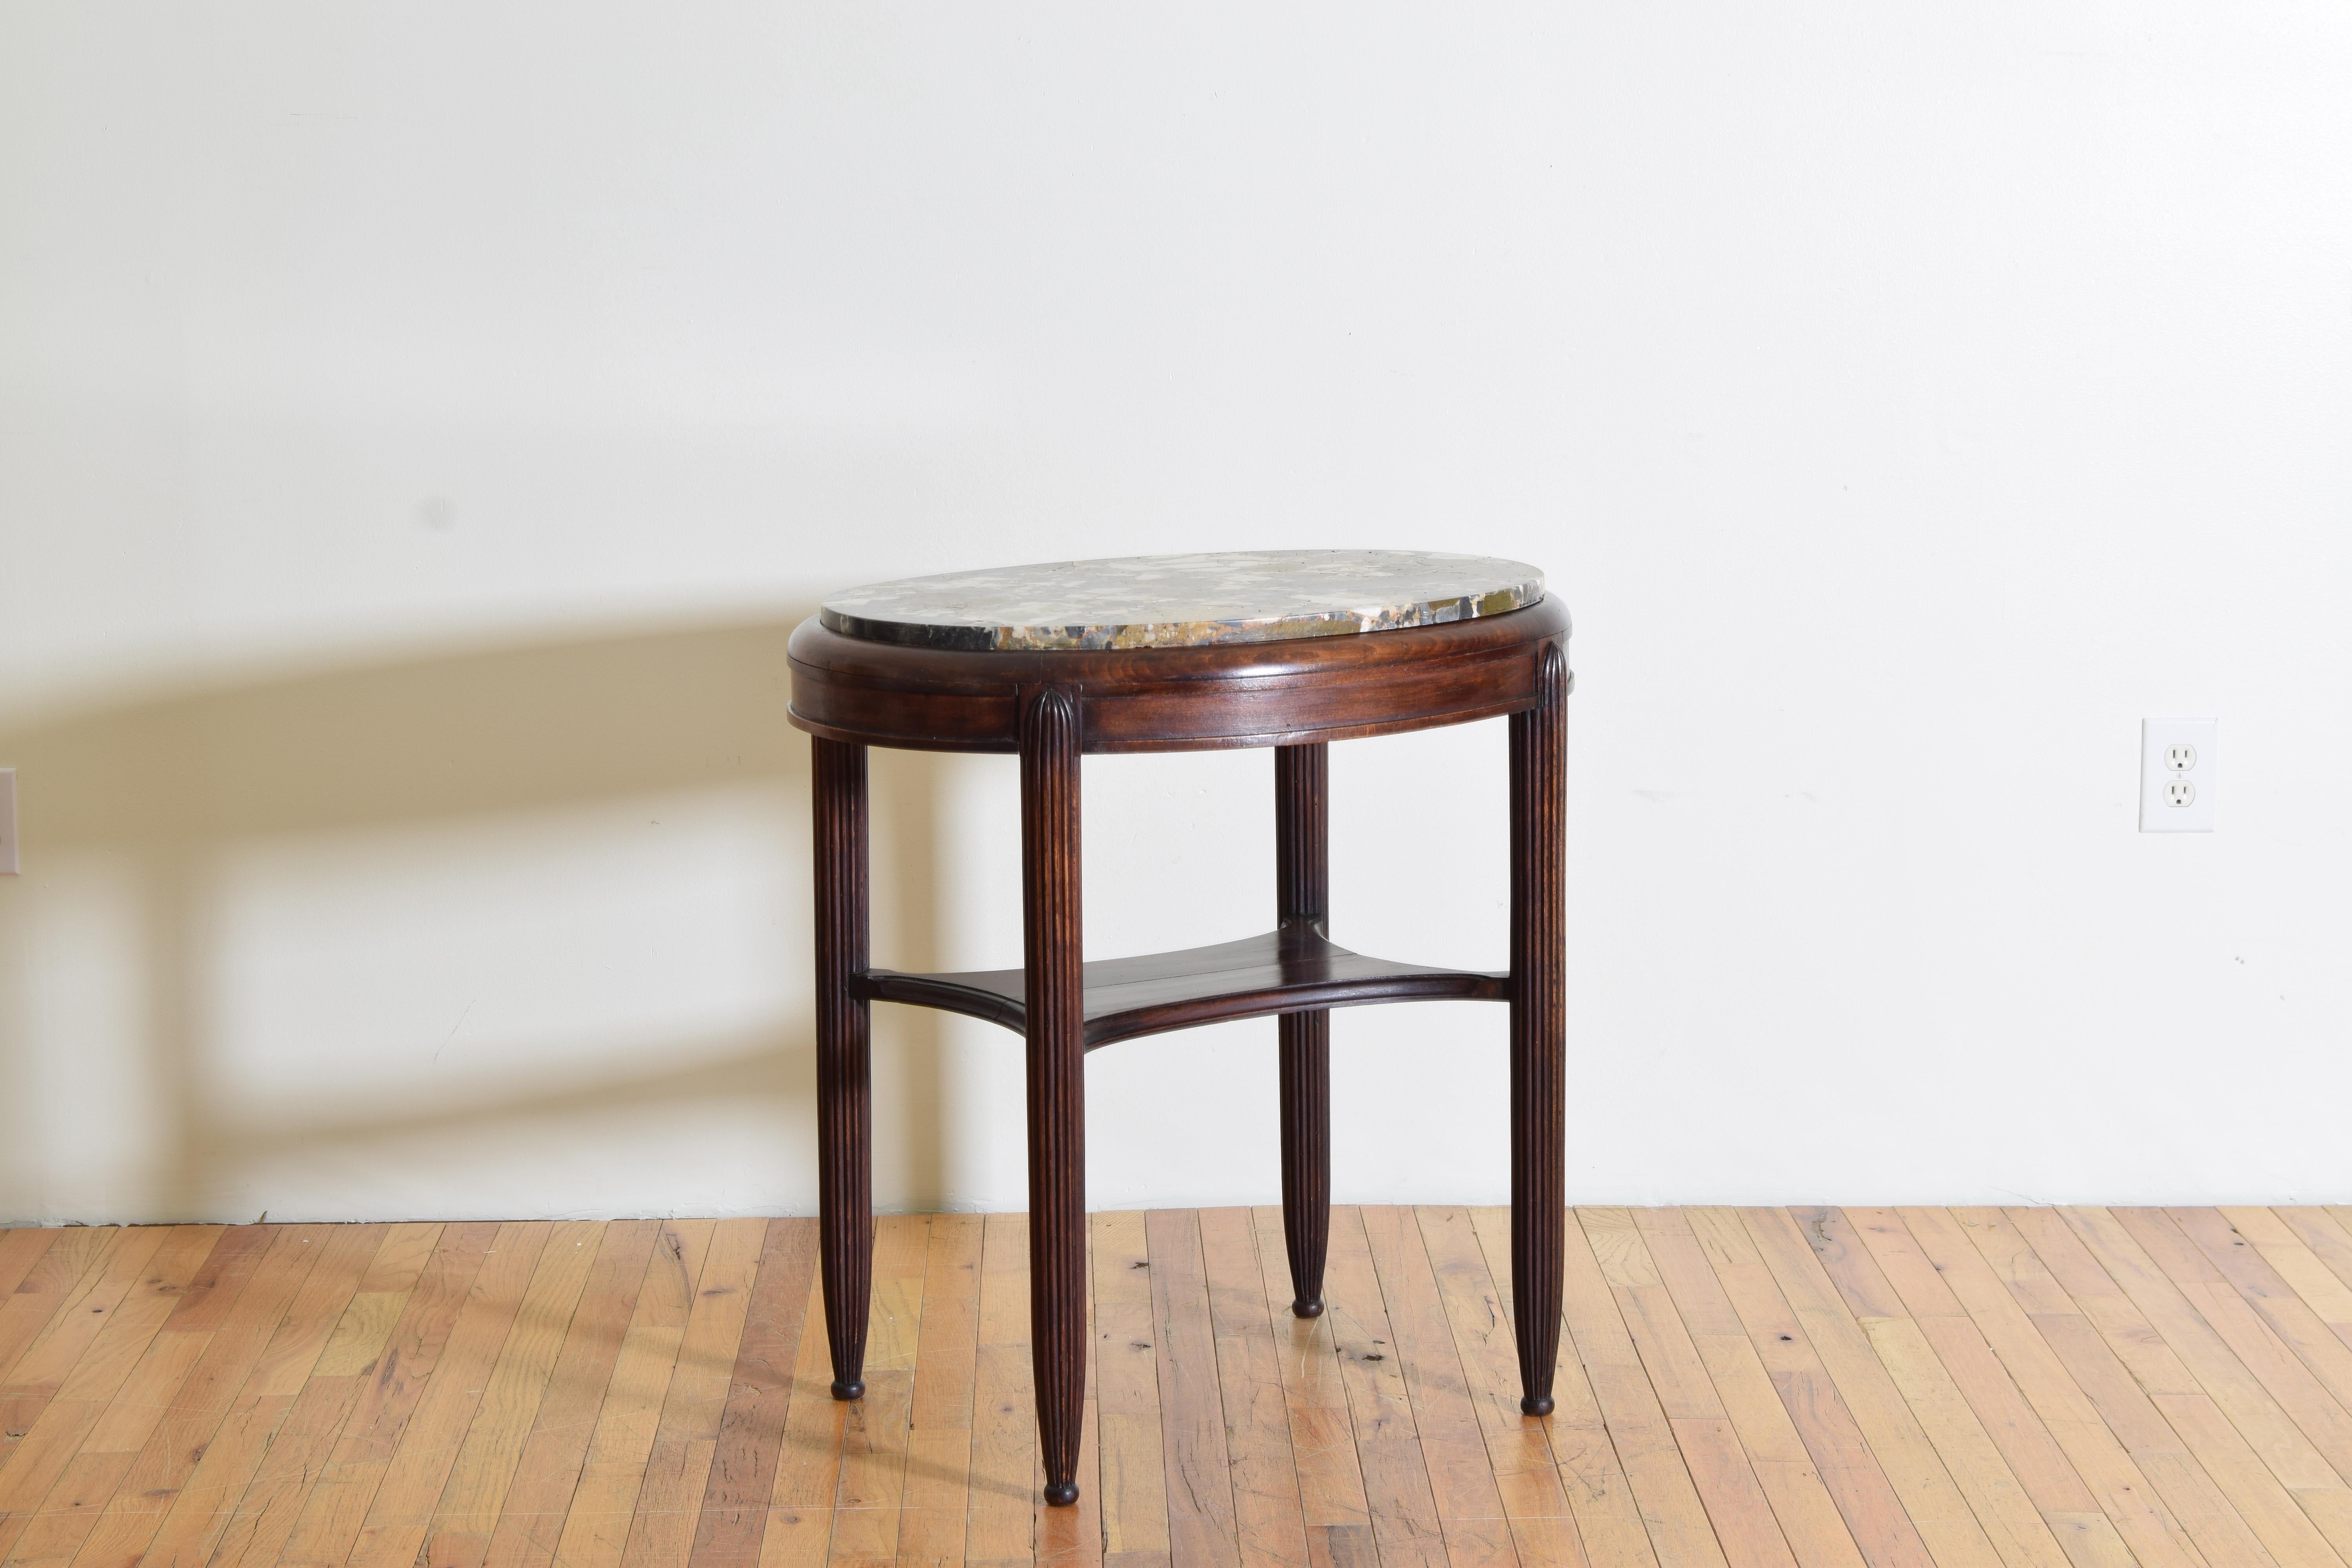 A castle-scaled side table with a conglomerate marble top and reeded legs.